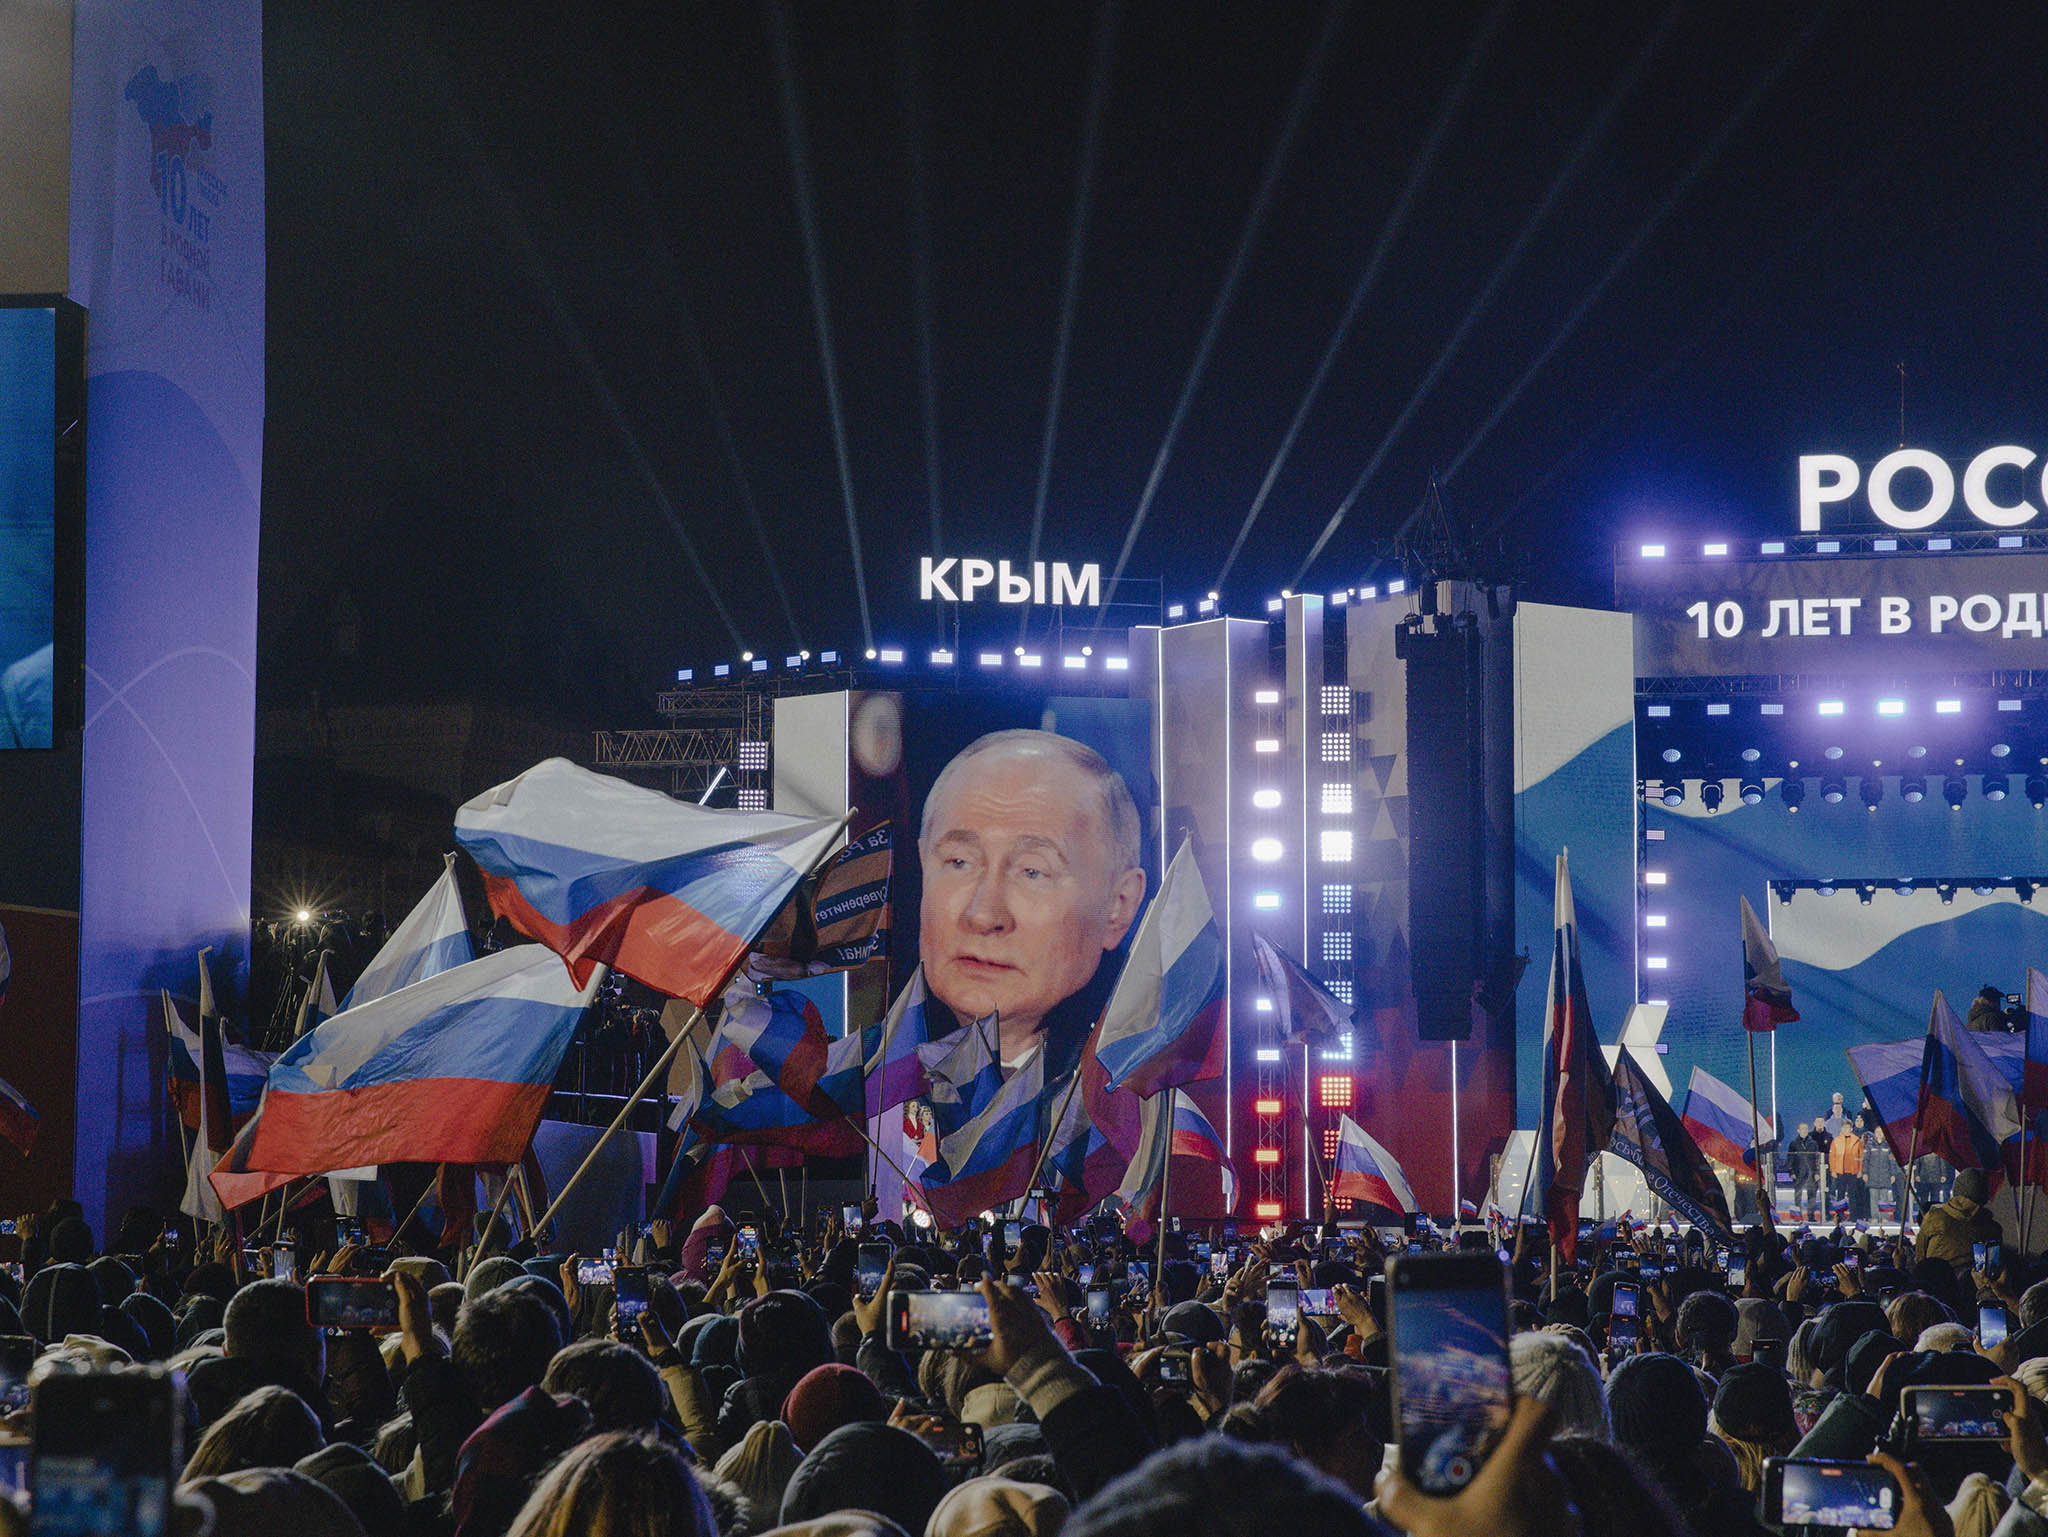 A screen displays Russian President Vladimir Putin as he speaks at an event marking the 10th anniversary of Russia’s illegal annexation of Crimea from Ukraine on Red Square in Moscow, March 18, 2024. (Nanna Heitmann/The New York Times)